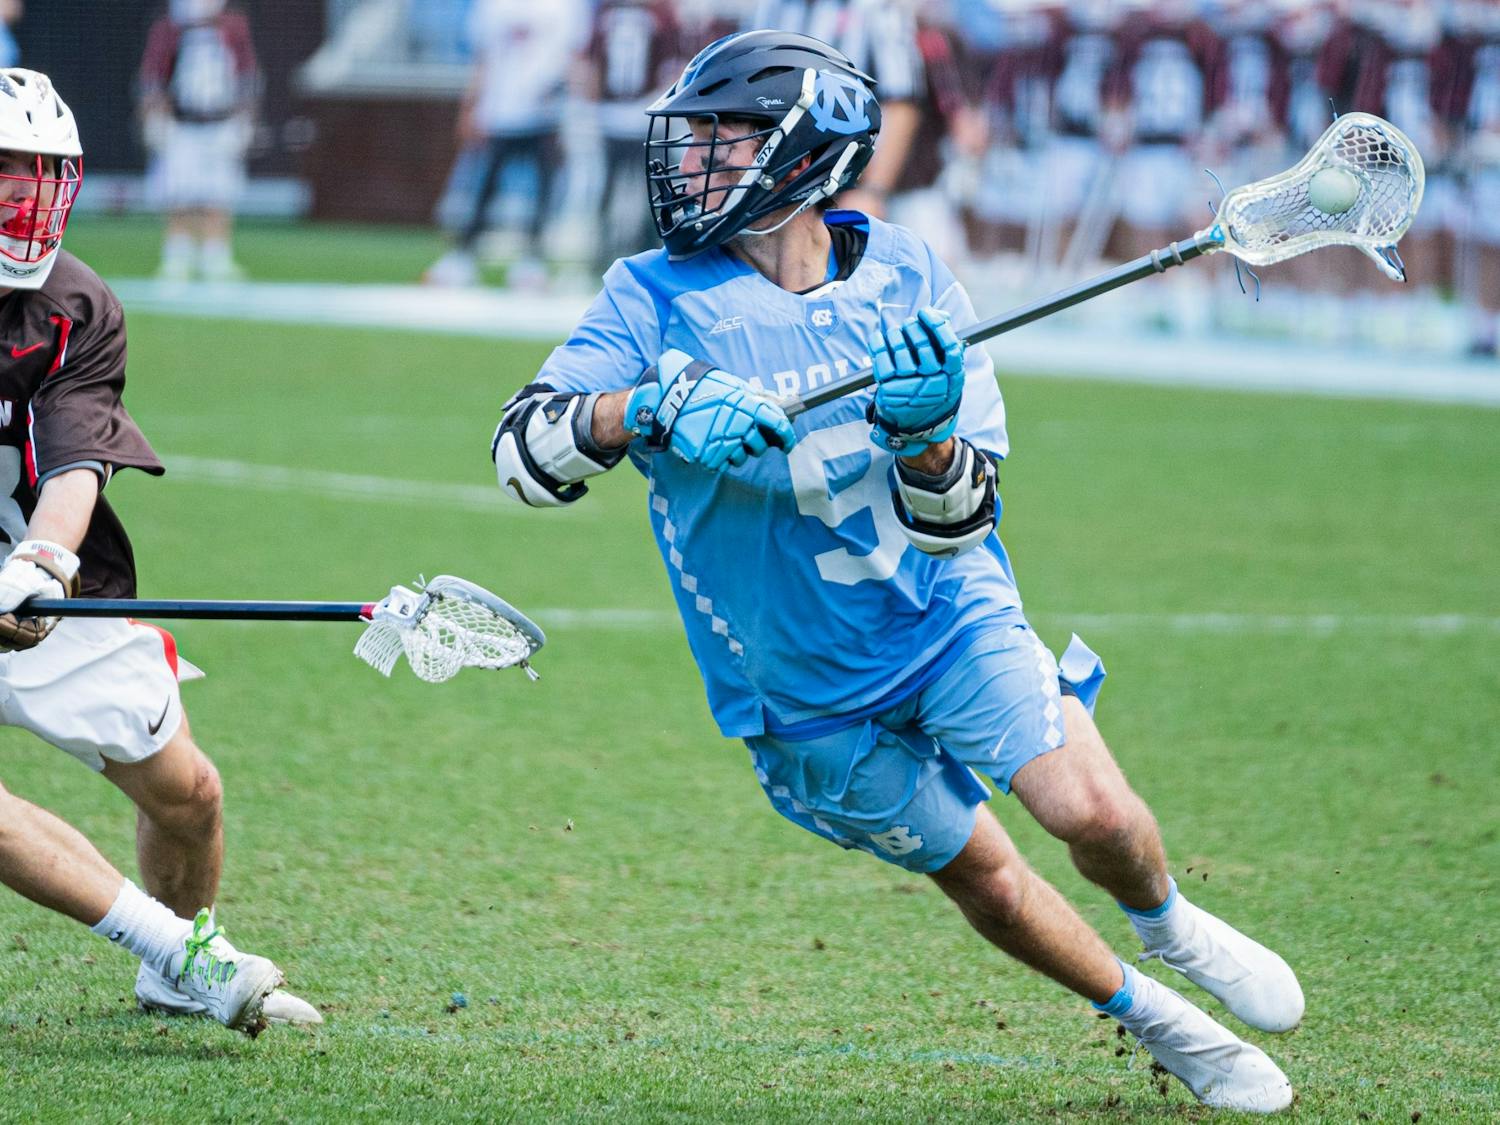 Senior attackman Jacob Kelly (9) looks to cross the ball during a men's lacrosse game in Dorrance Stadium against Brown University on Wednesday, Feb. 23, 2022. UNC won 14-11.